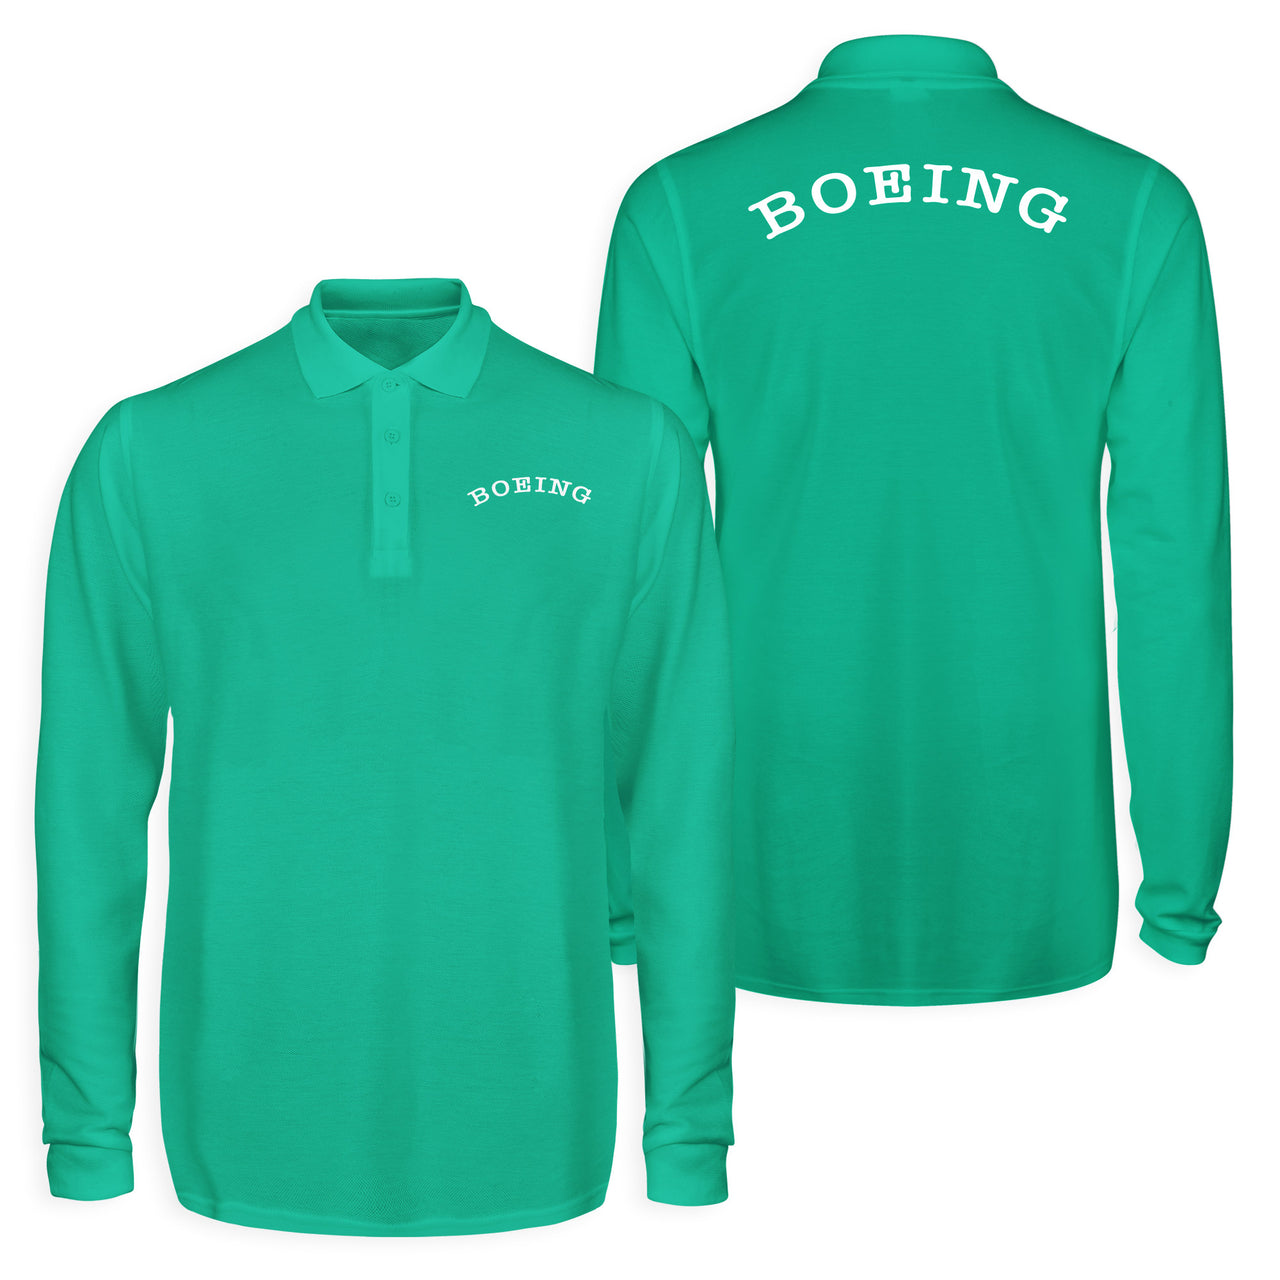 Special BOEING Text Designed Long Sleeve Polo T-Shirts (Double-Side)